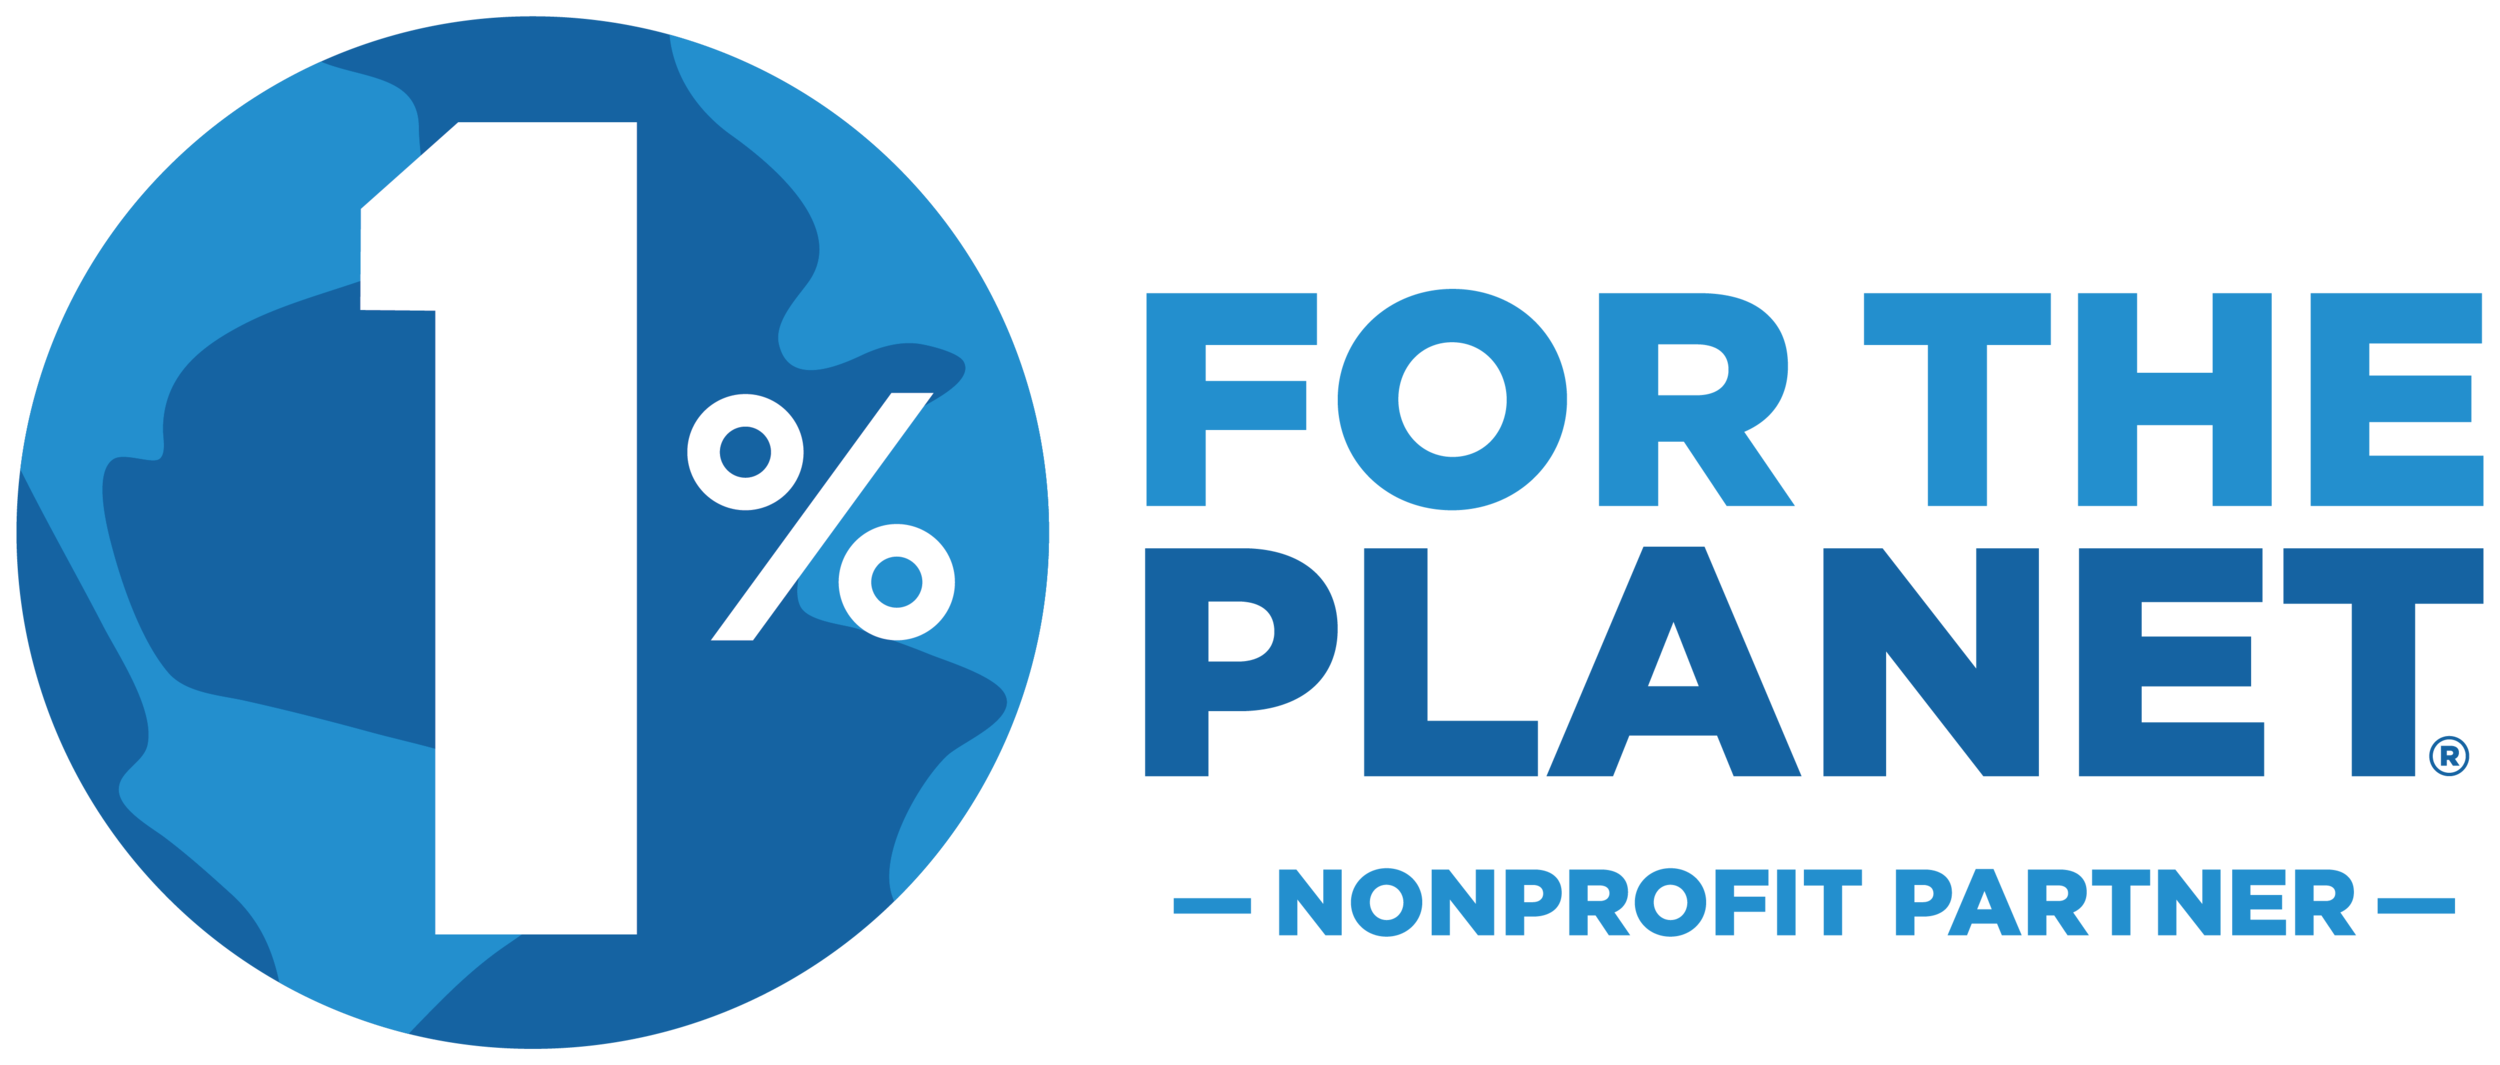 1% for the planet logo.png